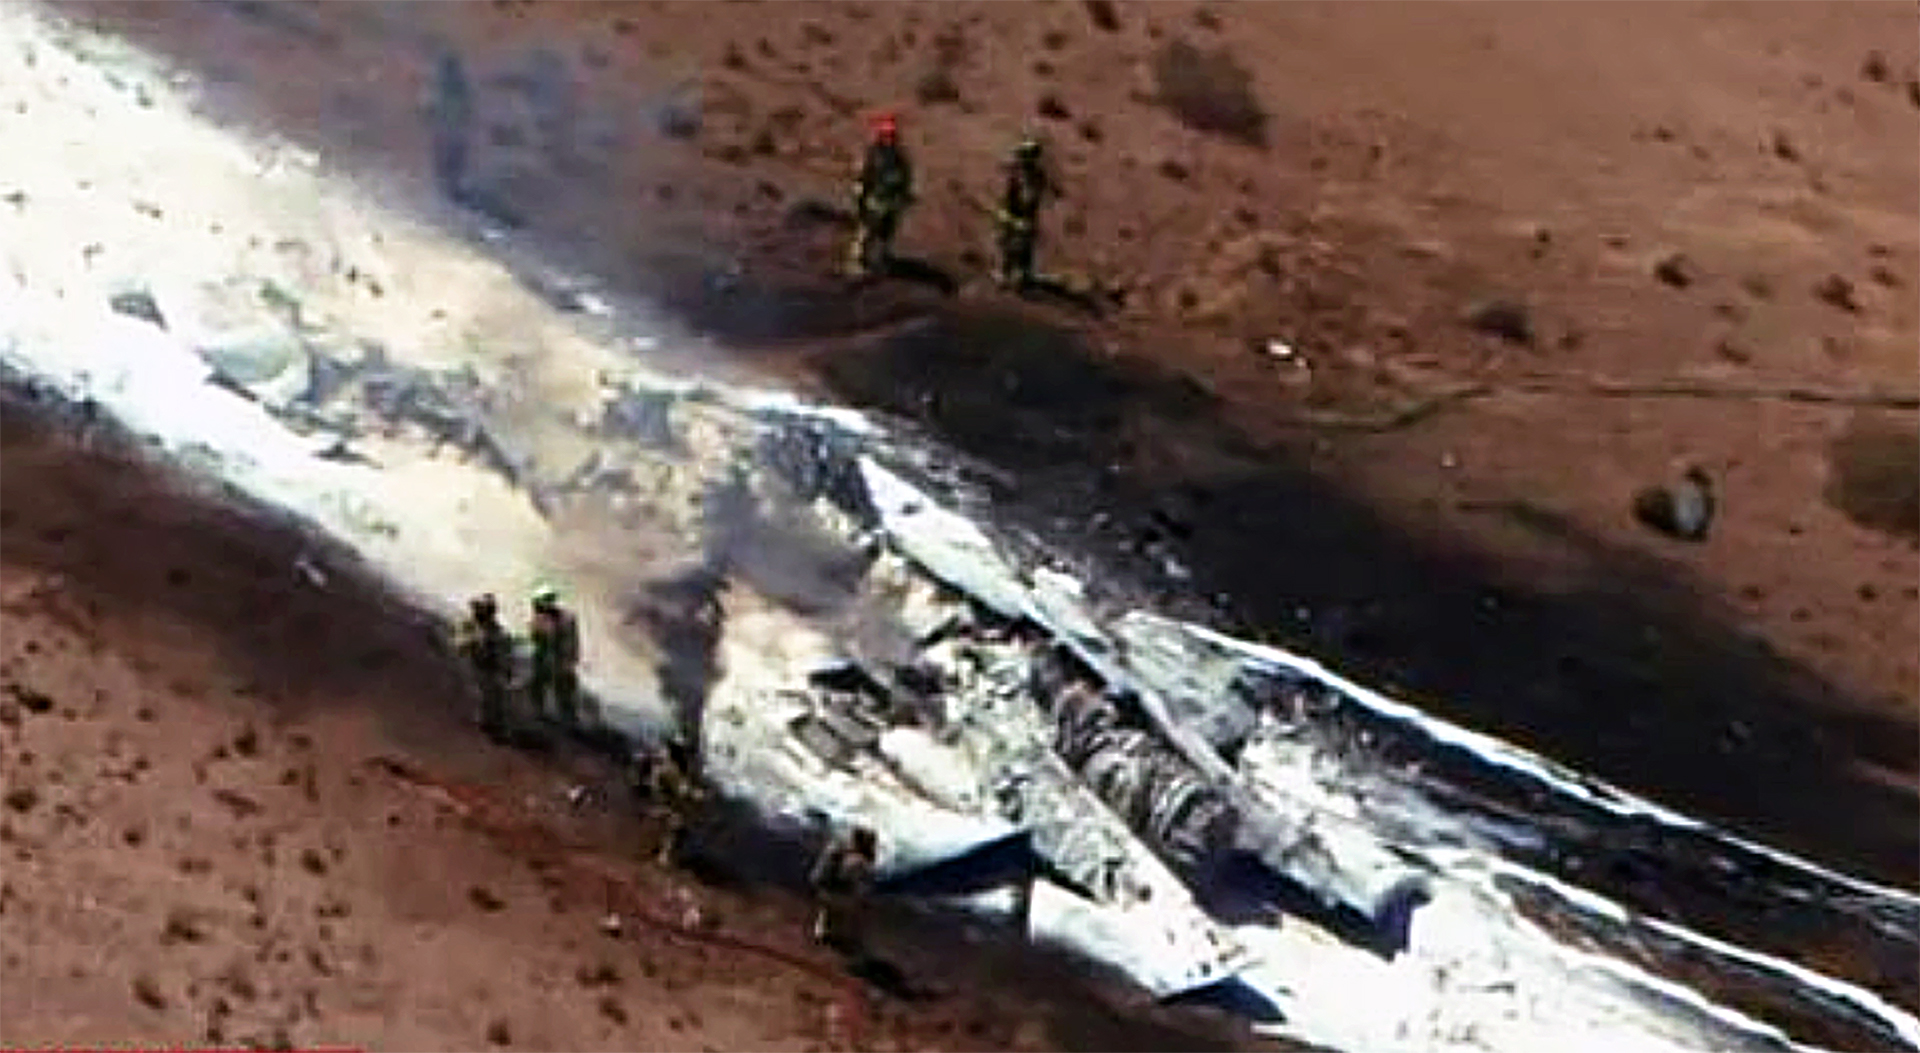 An F-35 Joint Strike Fighter crashed in Albuquerque New Mexico.